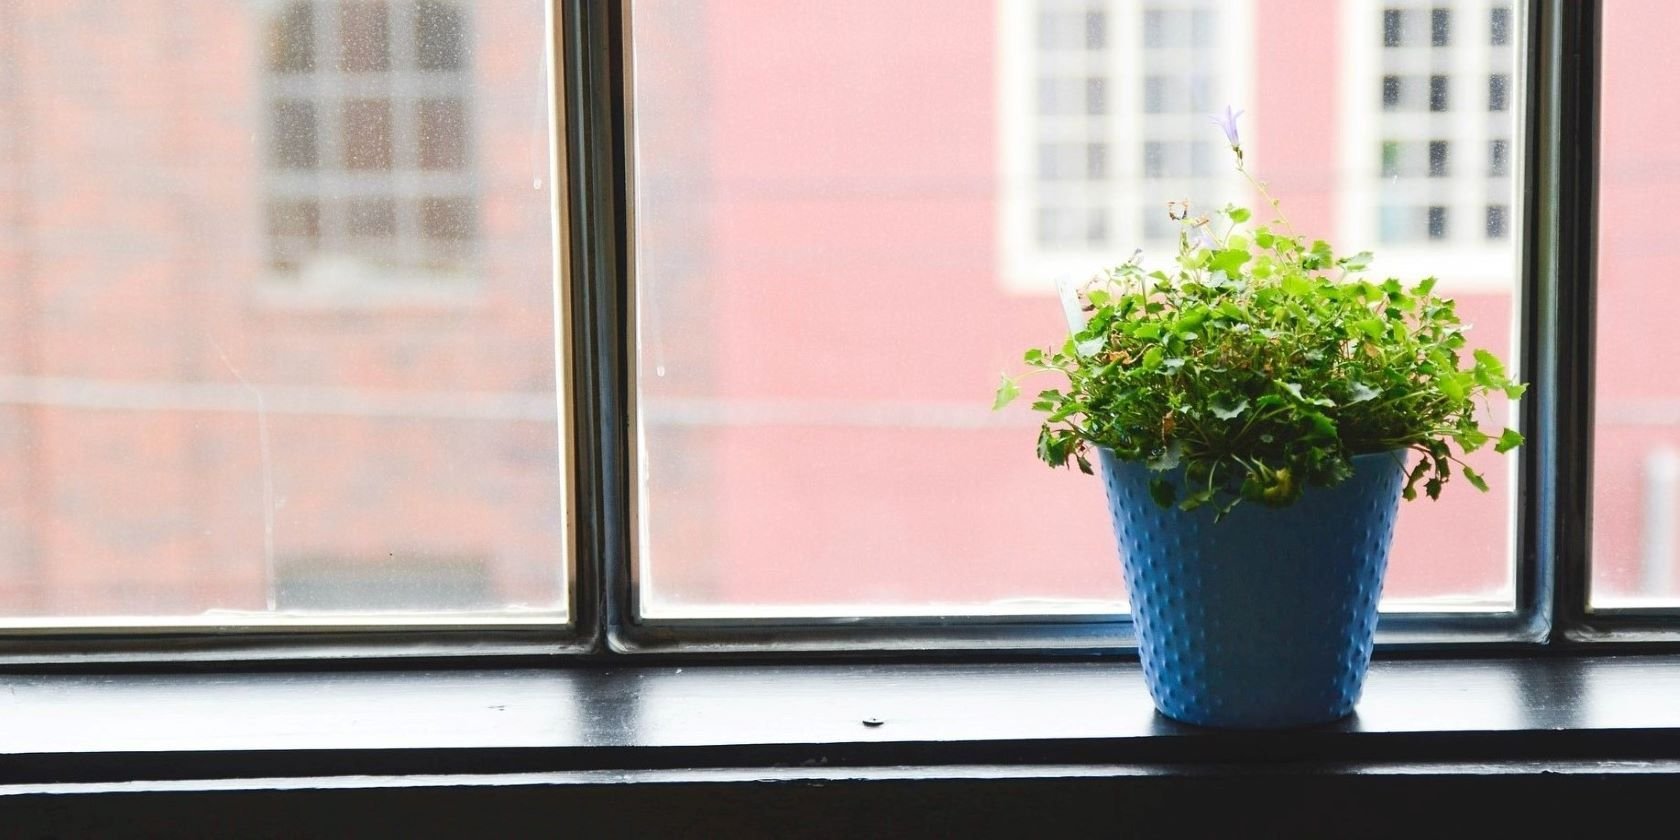 The 5 Best Android Apps for Taking Care of House Plants